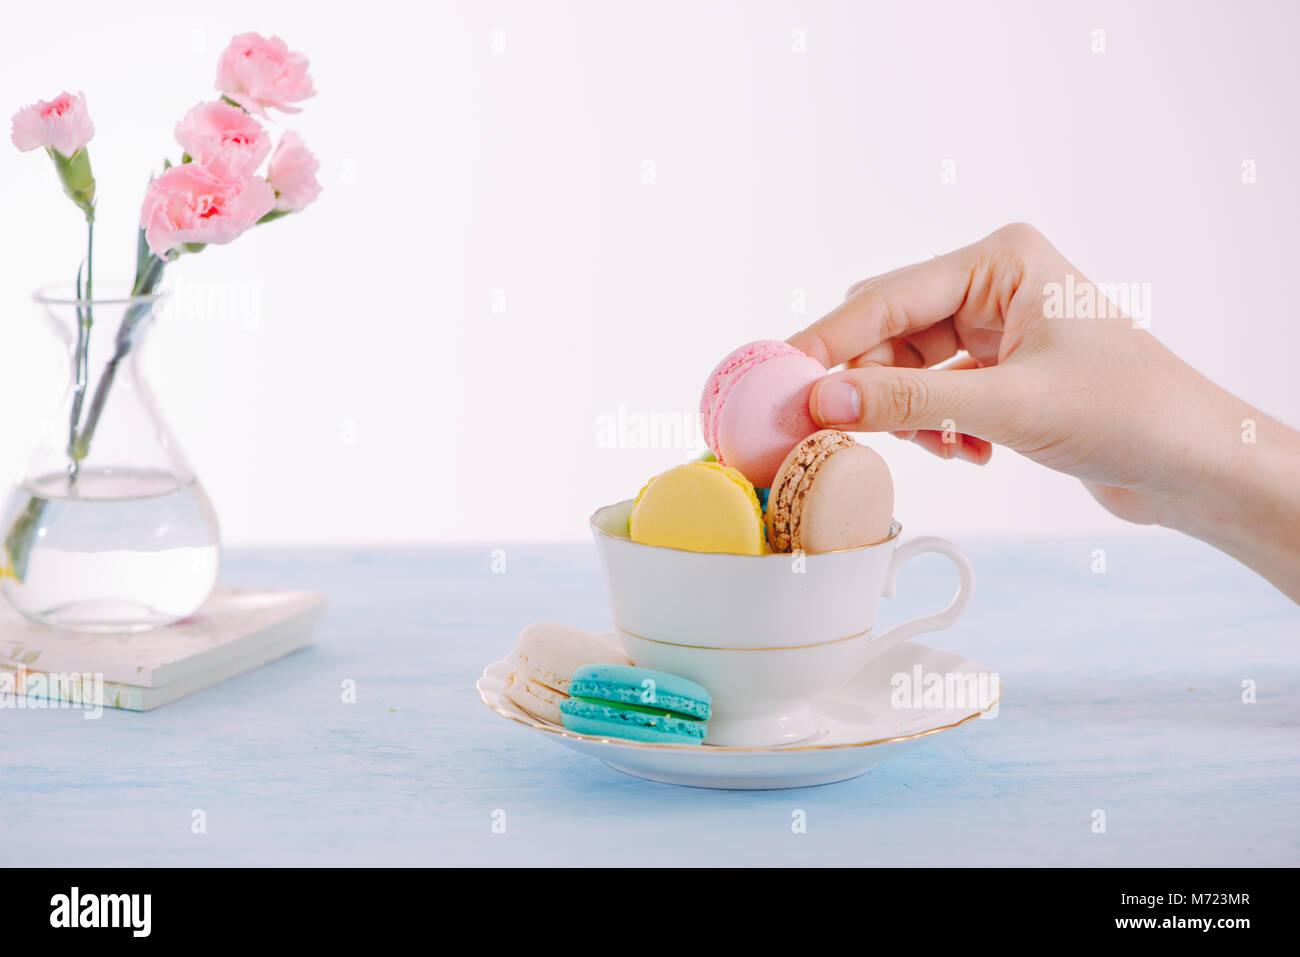 Sweet dessert. Colorful macarons on table in morning. Stock Photo